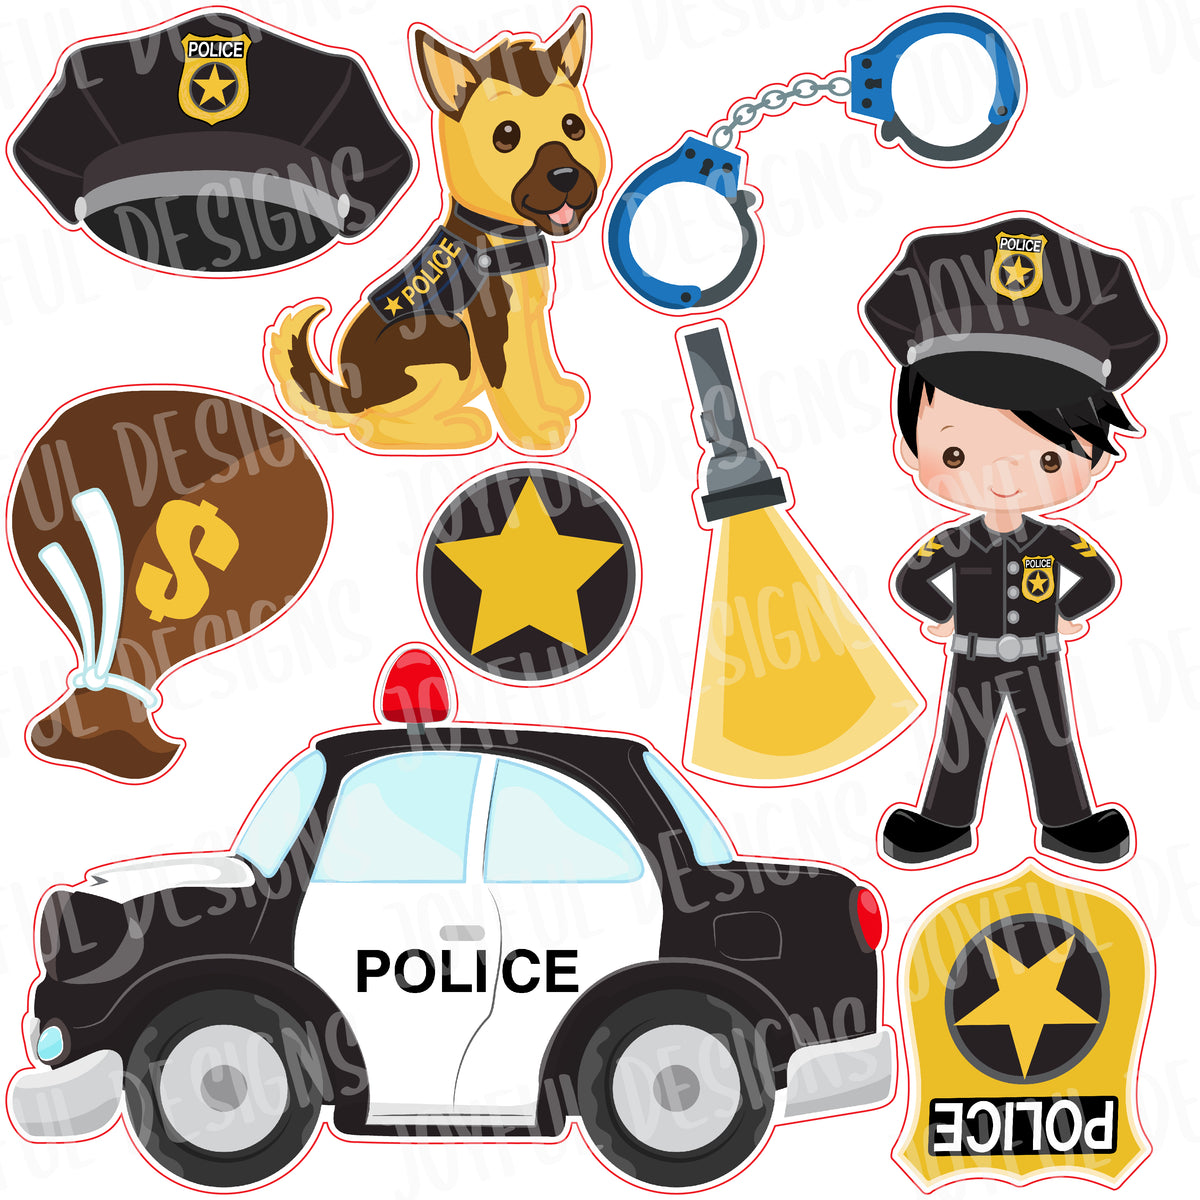 Police Theme - 11 Officer Options